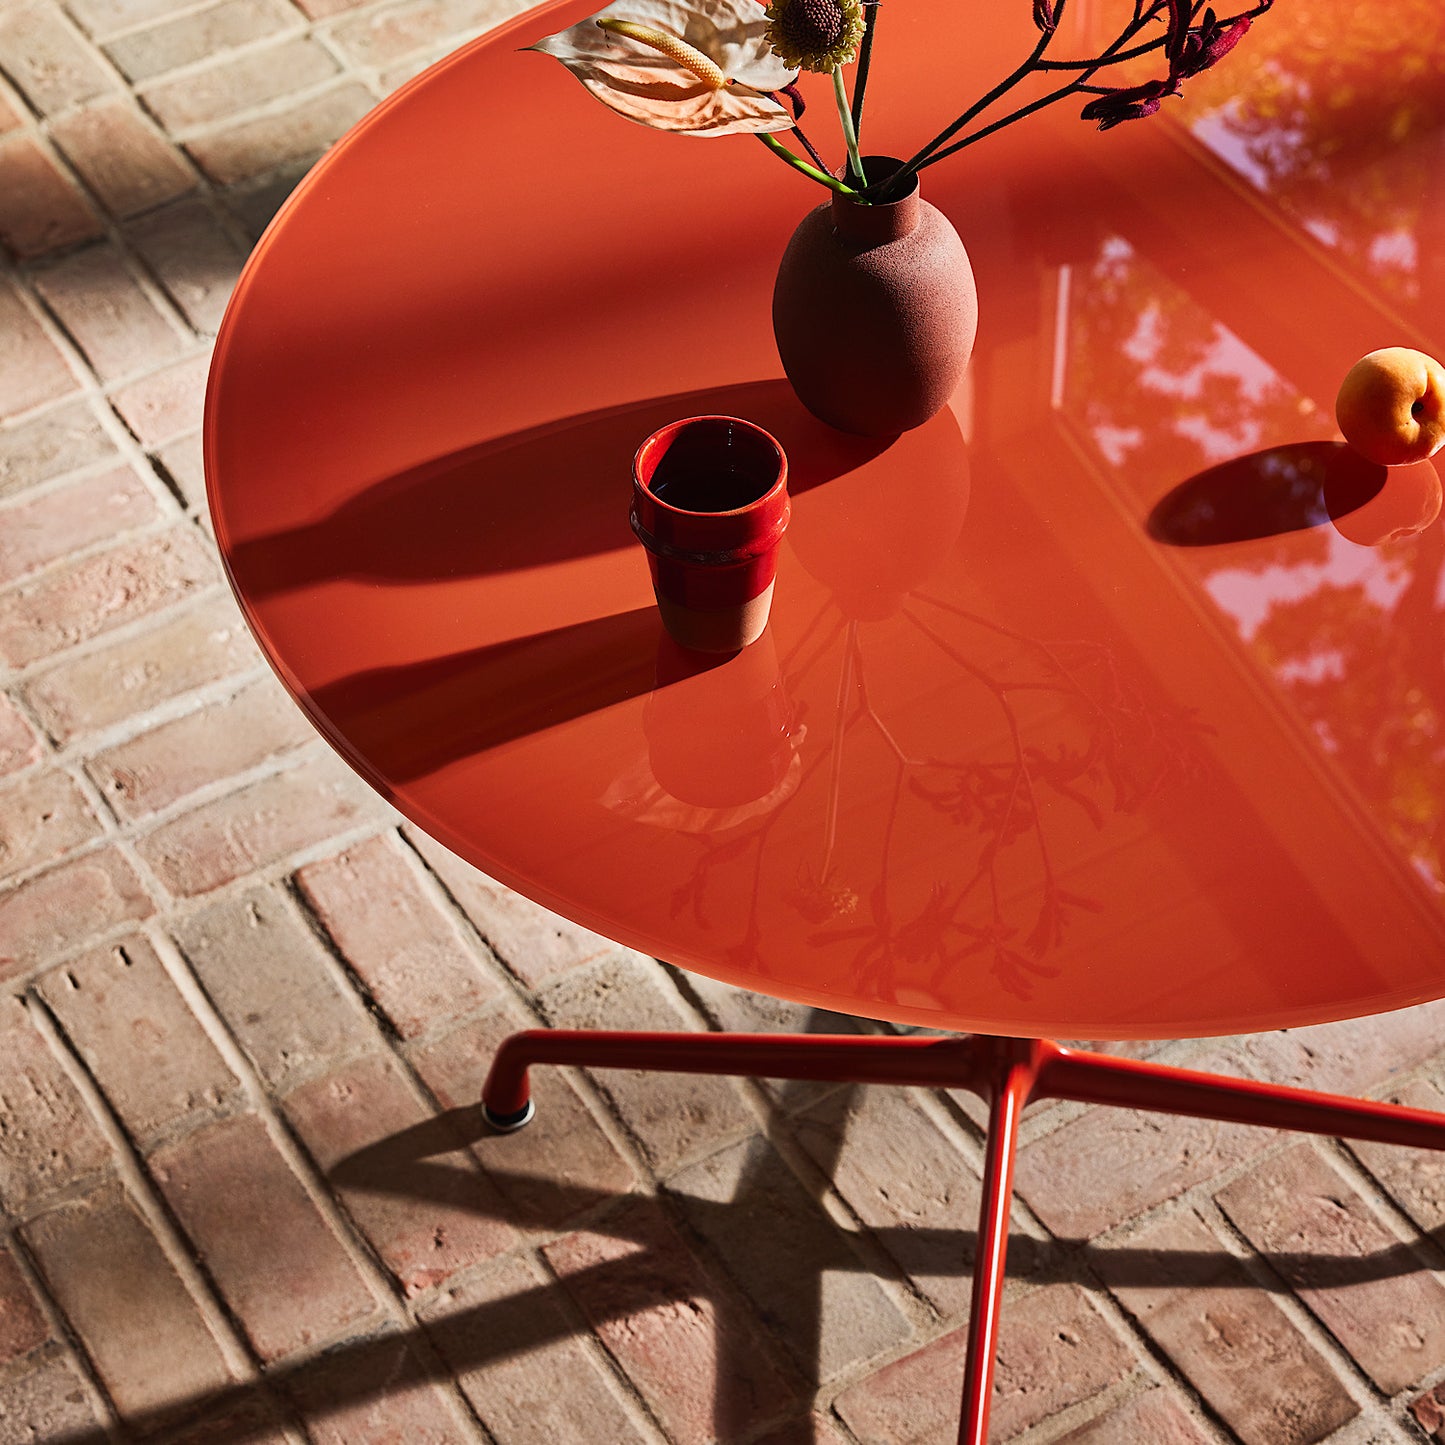 Herman Miller x HAY Eames Universal Base Round Table in Iron Red